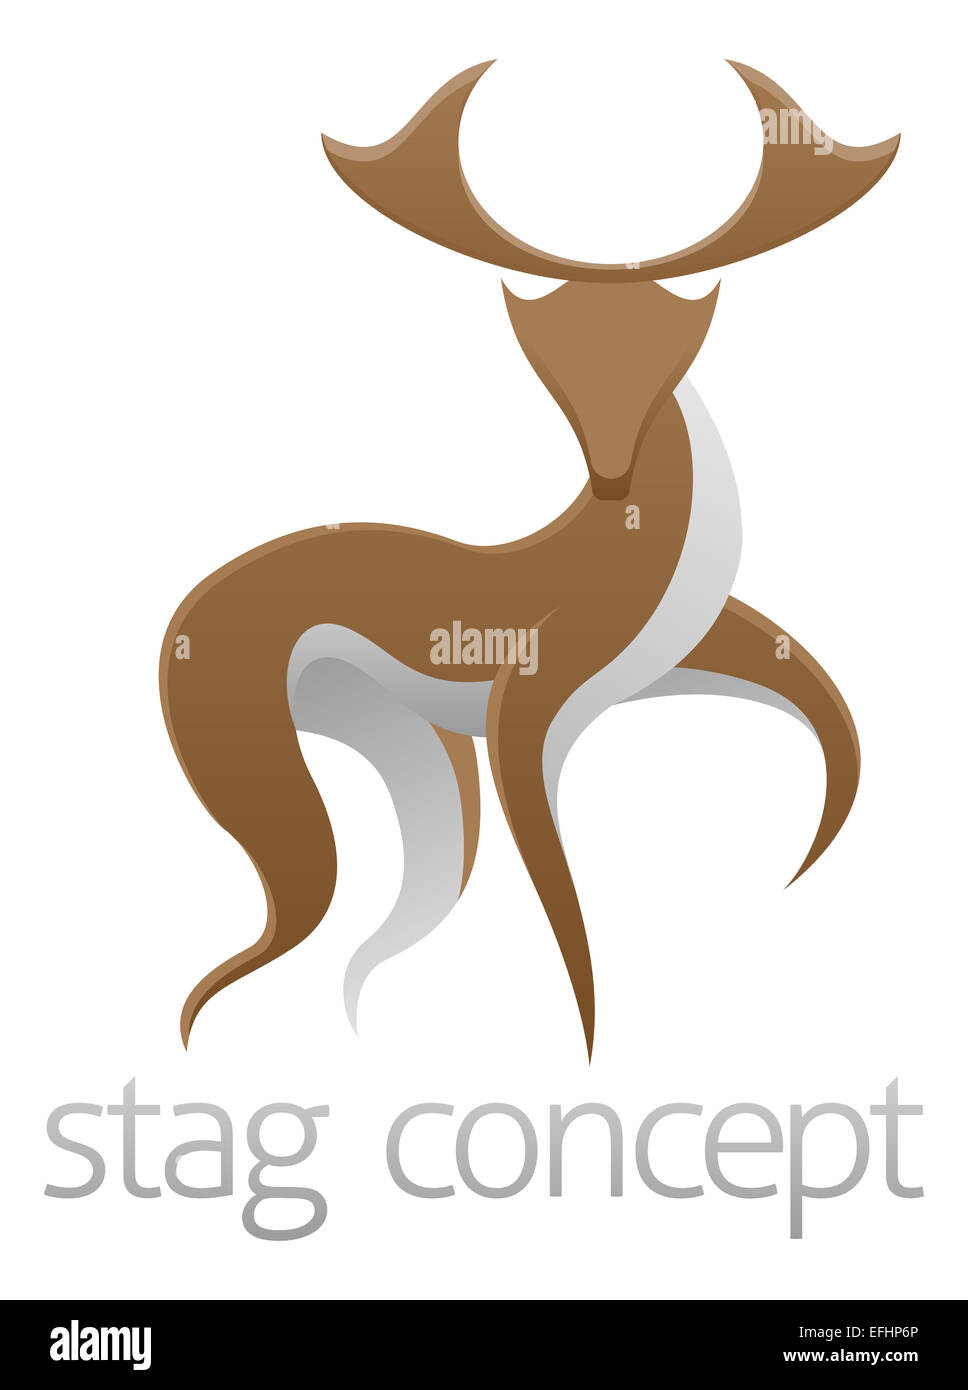 An abstract illustration of a stag deer concept design Stock Photo